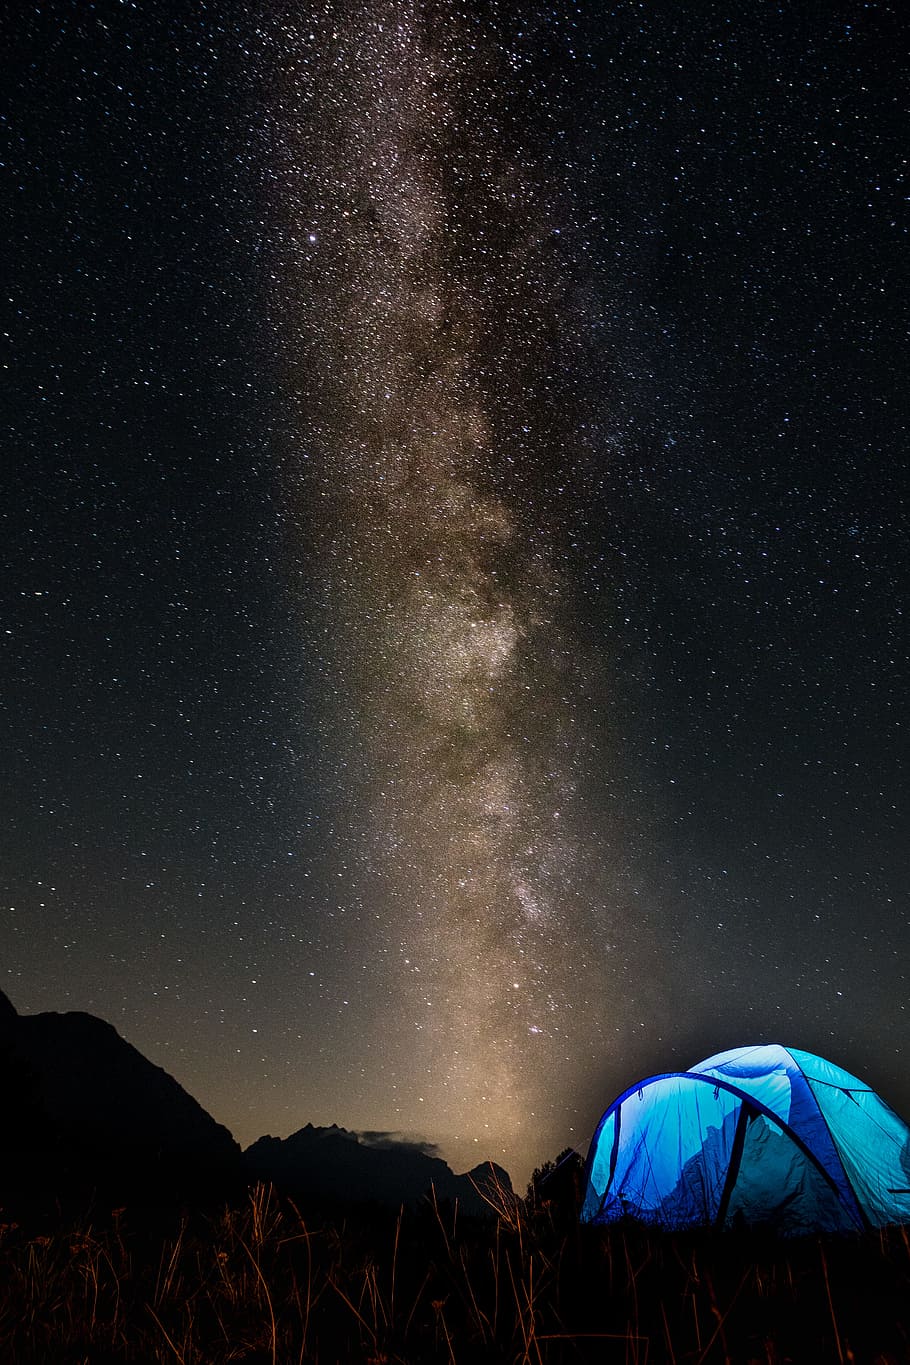 blue dome tent during nighttime, star, starry sky, night photography